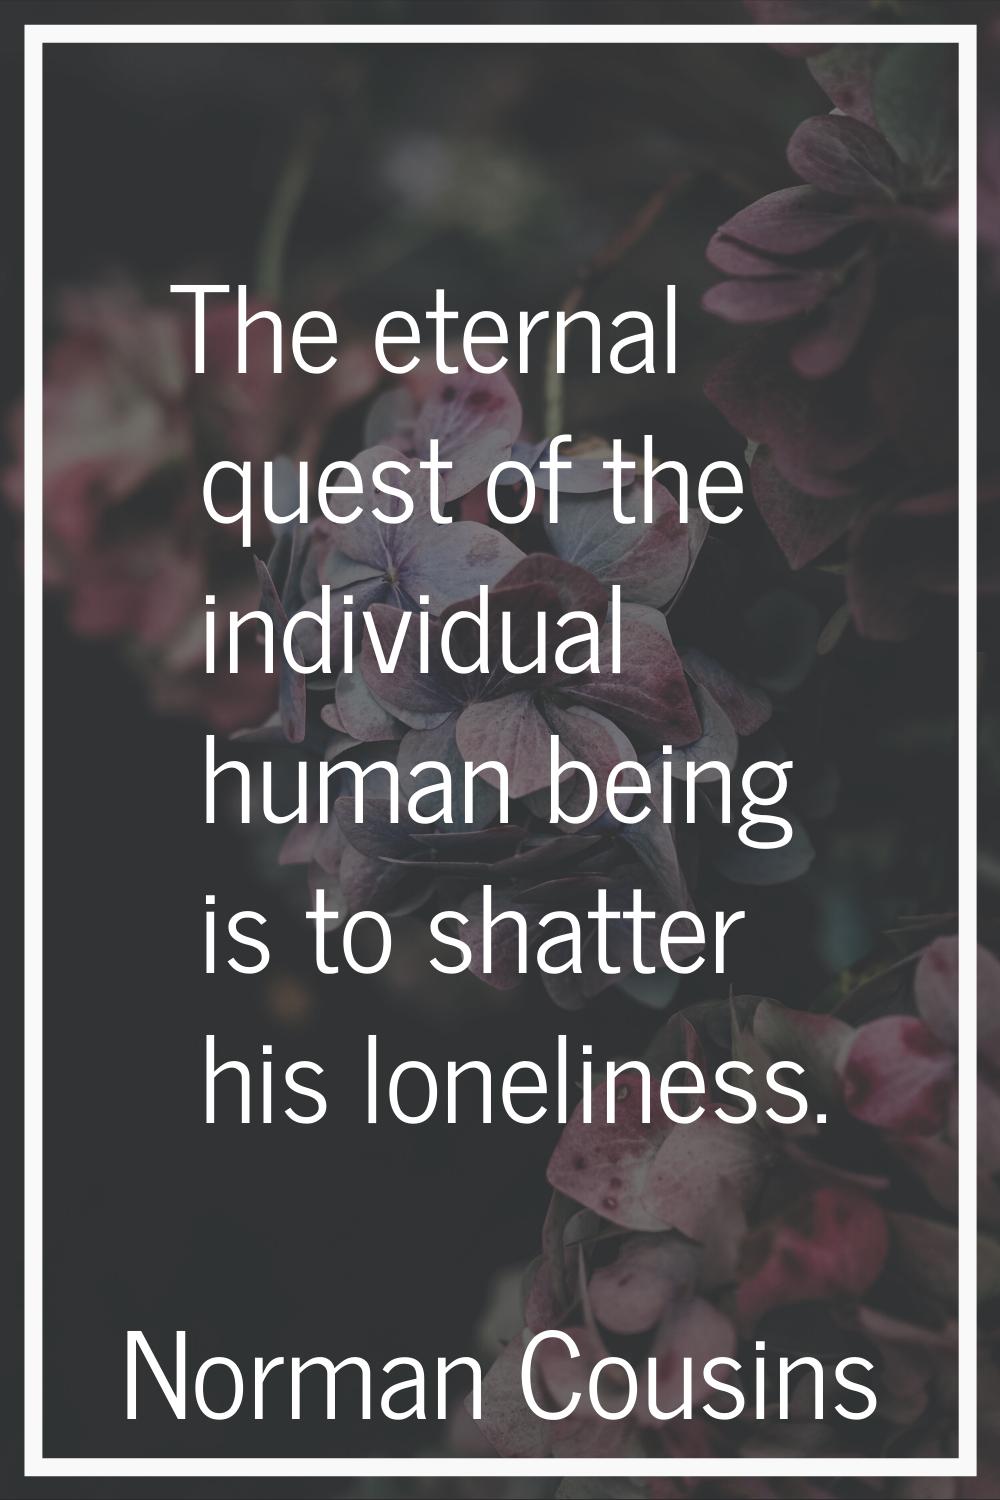 The eternal quest of the individual human being is to shatter his loneliness.